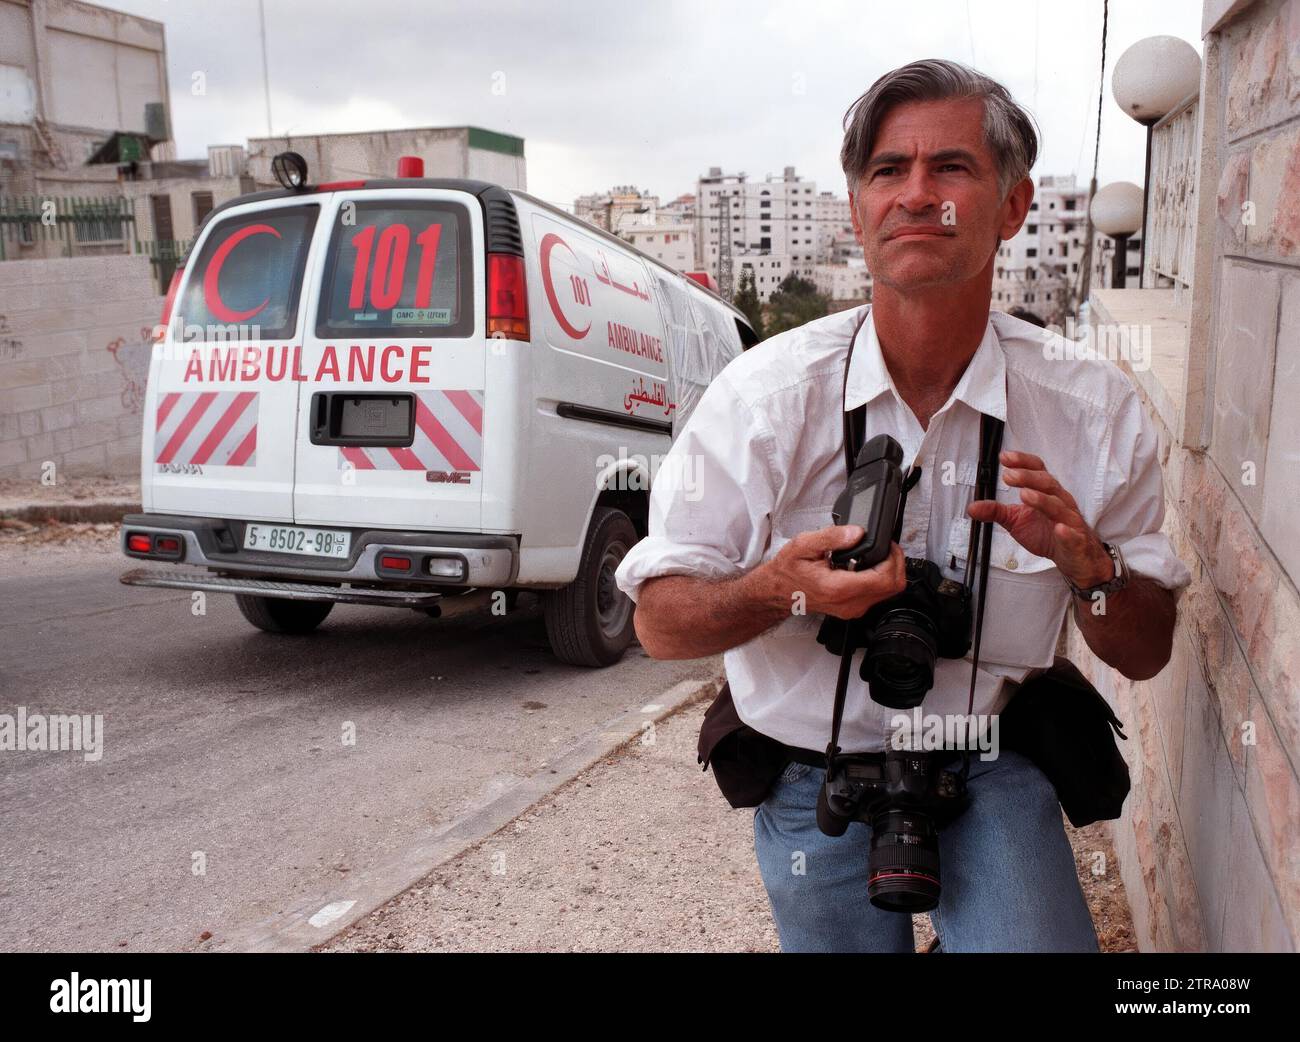 Ramallah (West Bank), 10/13/2000. Reporter James Nachtwey covering clashes between Palestinians and Israelis in the early days of the second Intifada. Photo: Luis de Vega. ARCHDC. Credit: Album / Archivo ABC / Luis De Vega Hernández Stock Photo